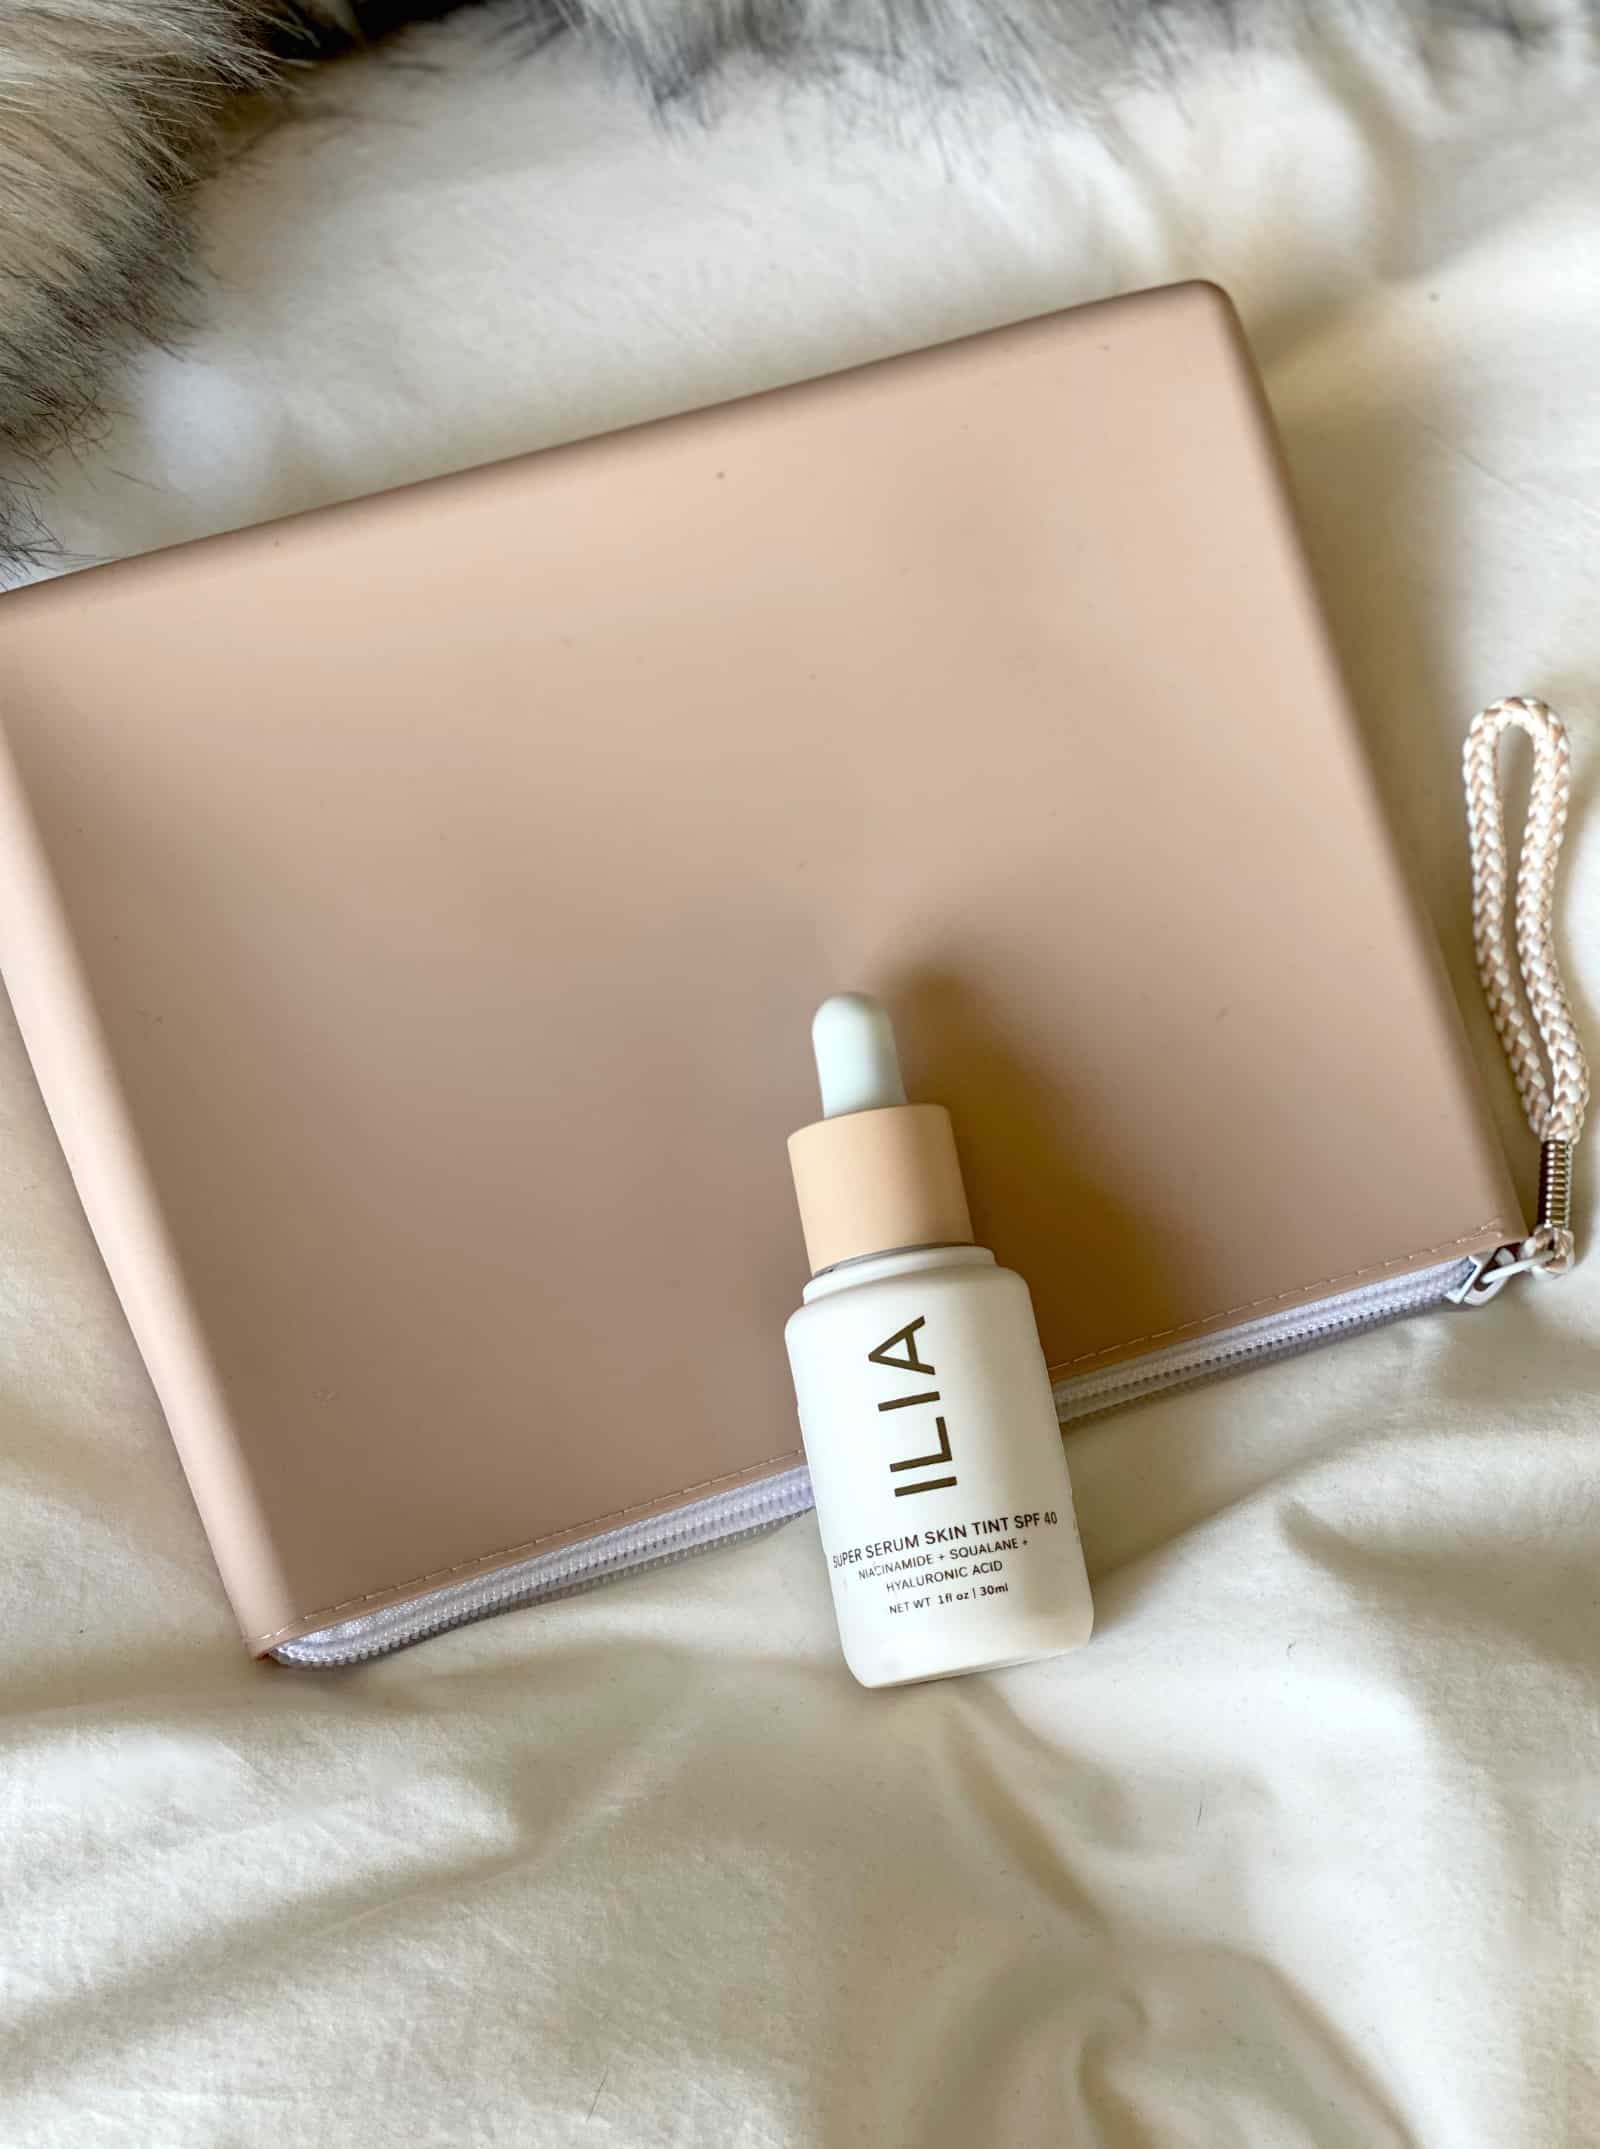 Ilia Beauty Super Skin Tint SPF 40 Review I wit & whimsy